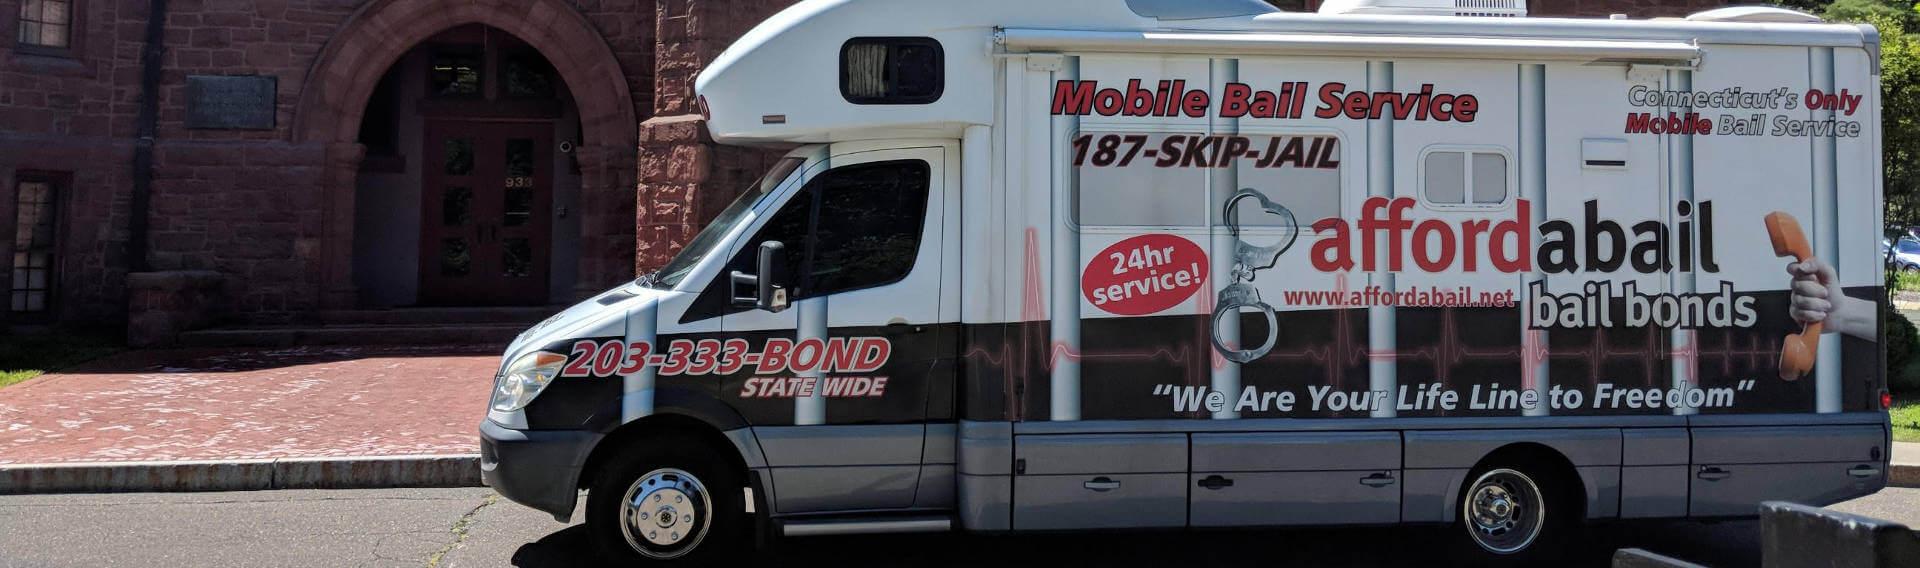 Mobile bail bonds service in Guilford CT